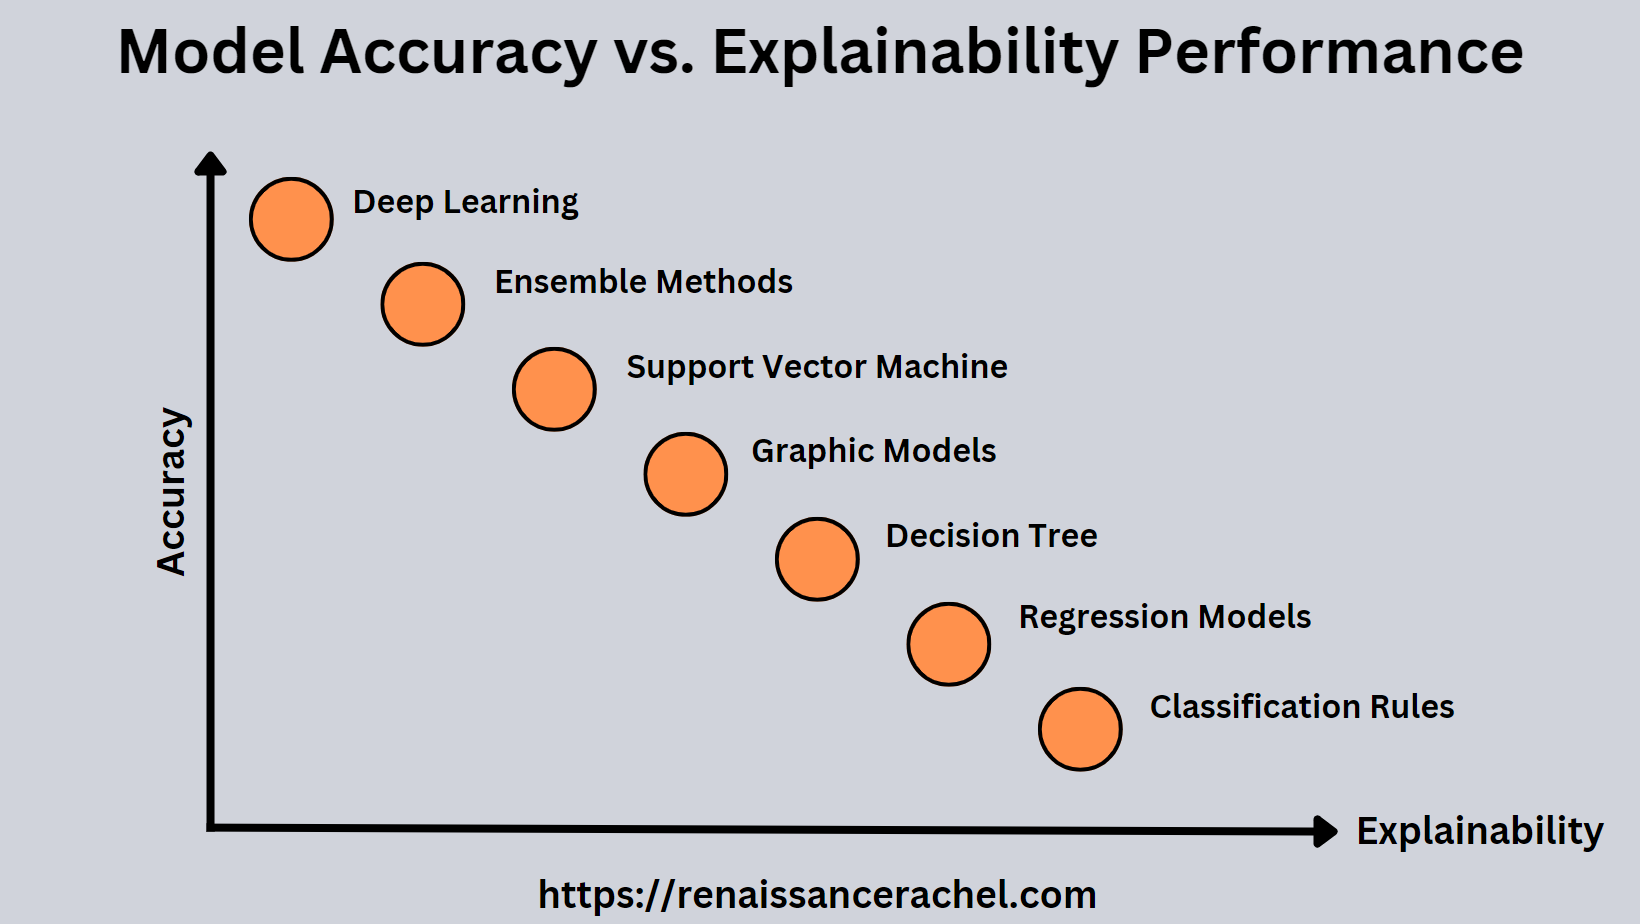 The output accuracy vs. the explanation accuracy of machine learning technology and shows that less accuracy is achieved as AI becomes more explainable.